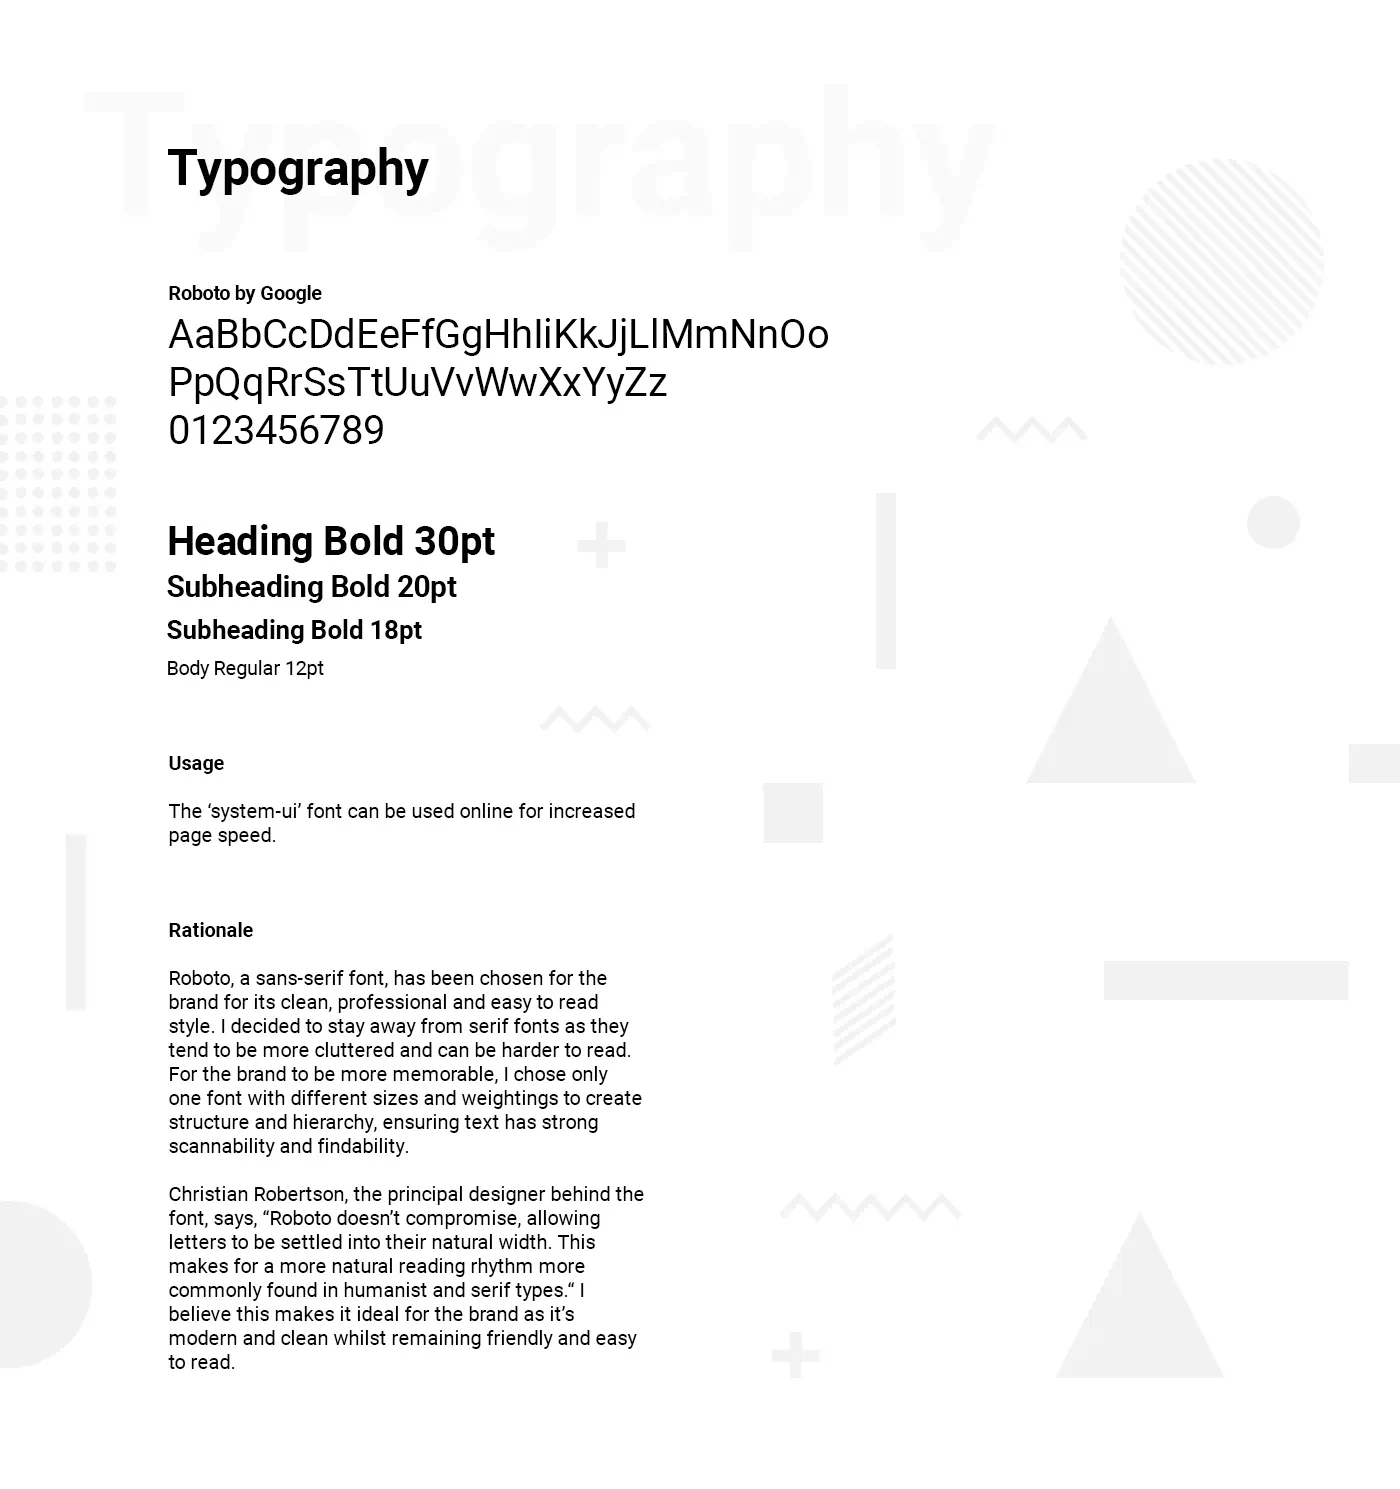 The typography page outlines the brand font